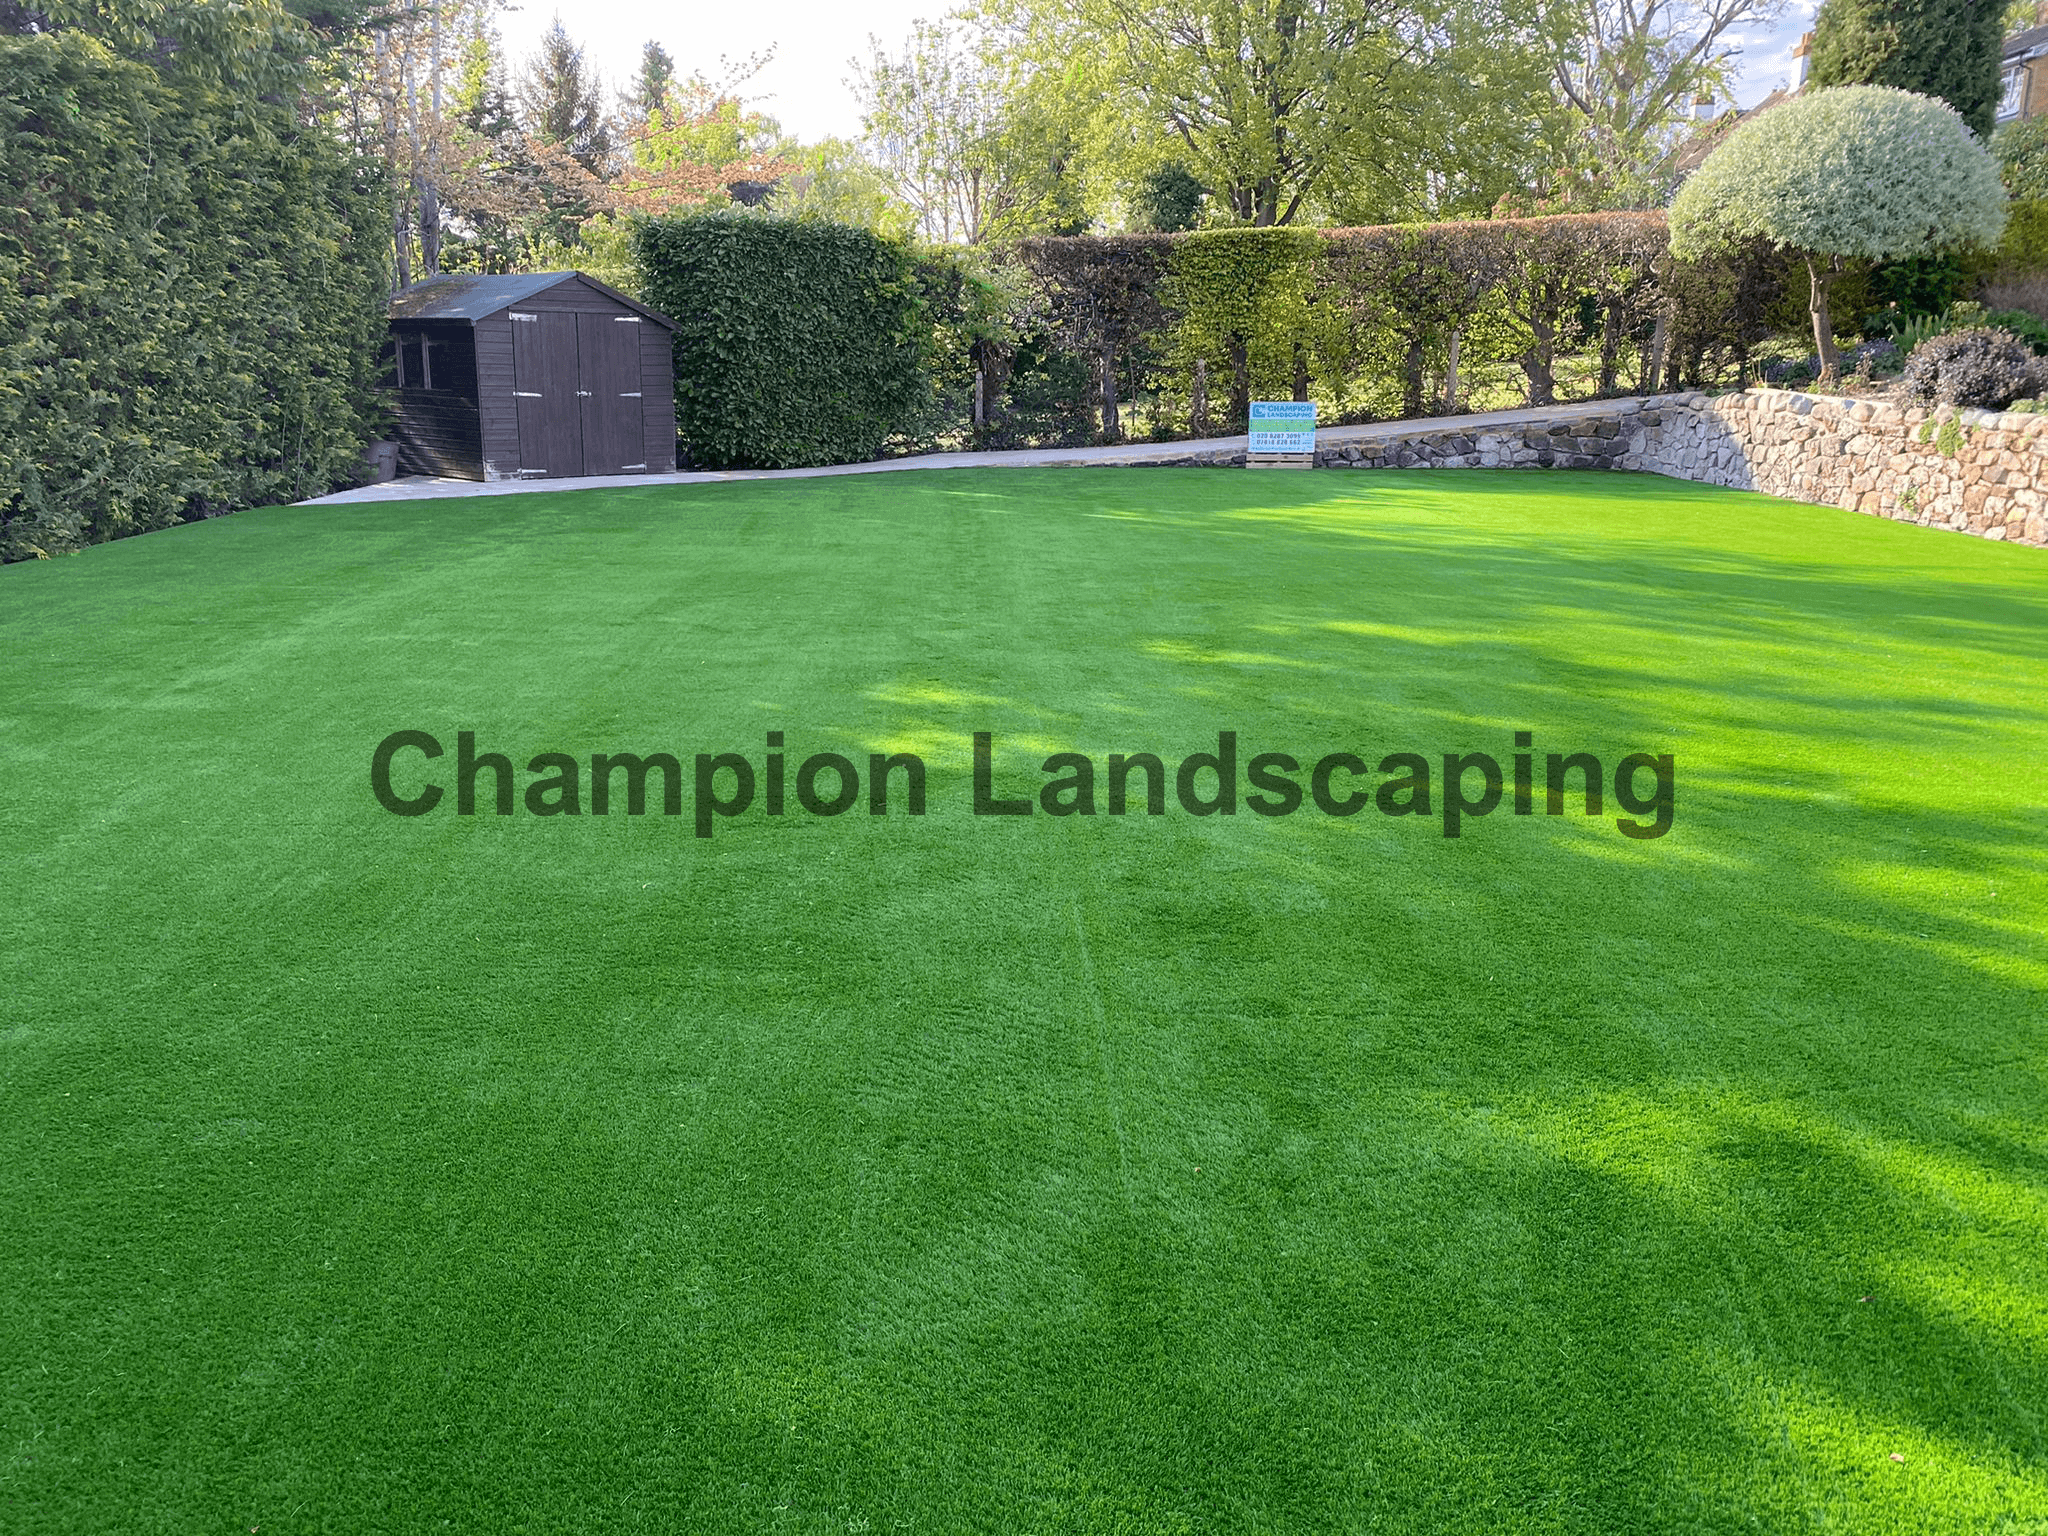 https://www.championlandscaping.co.uk/wp-content/uploads/2021/10/68.png